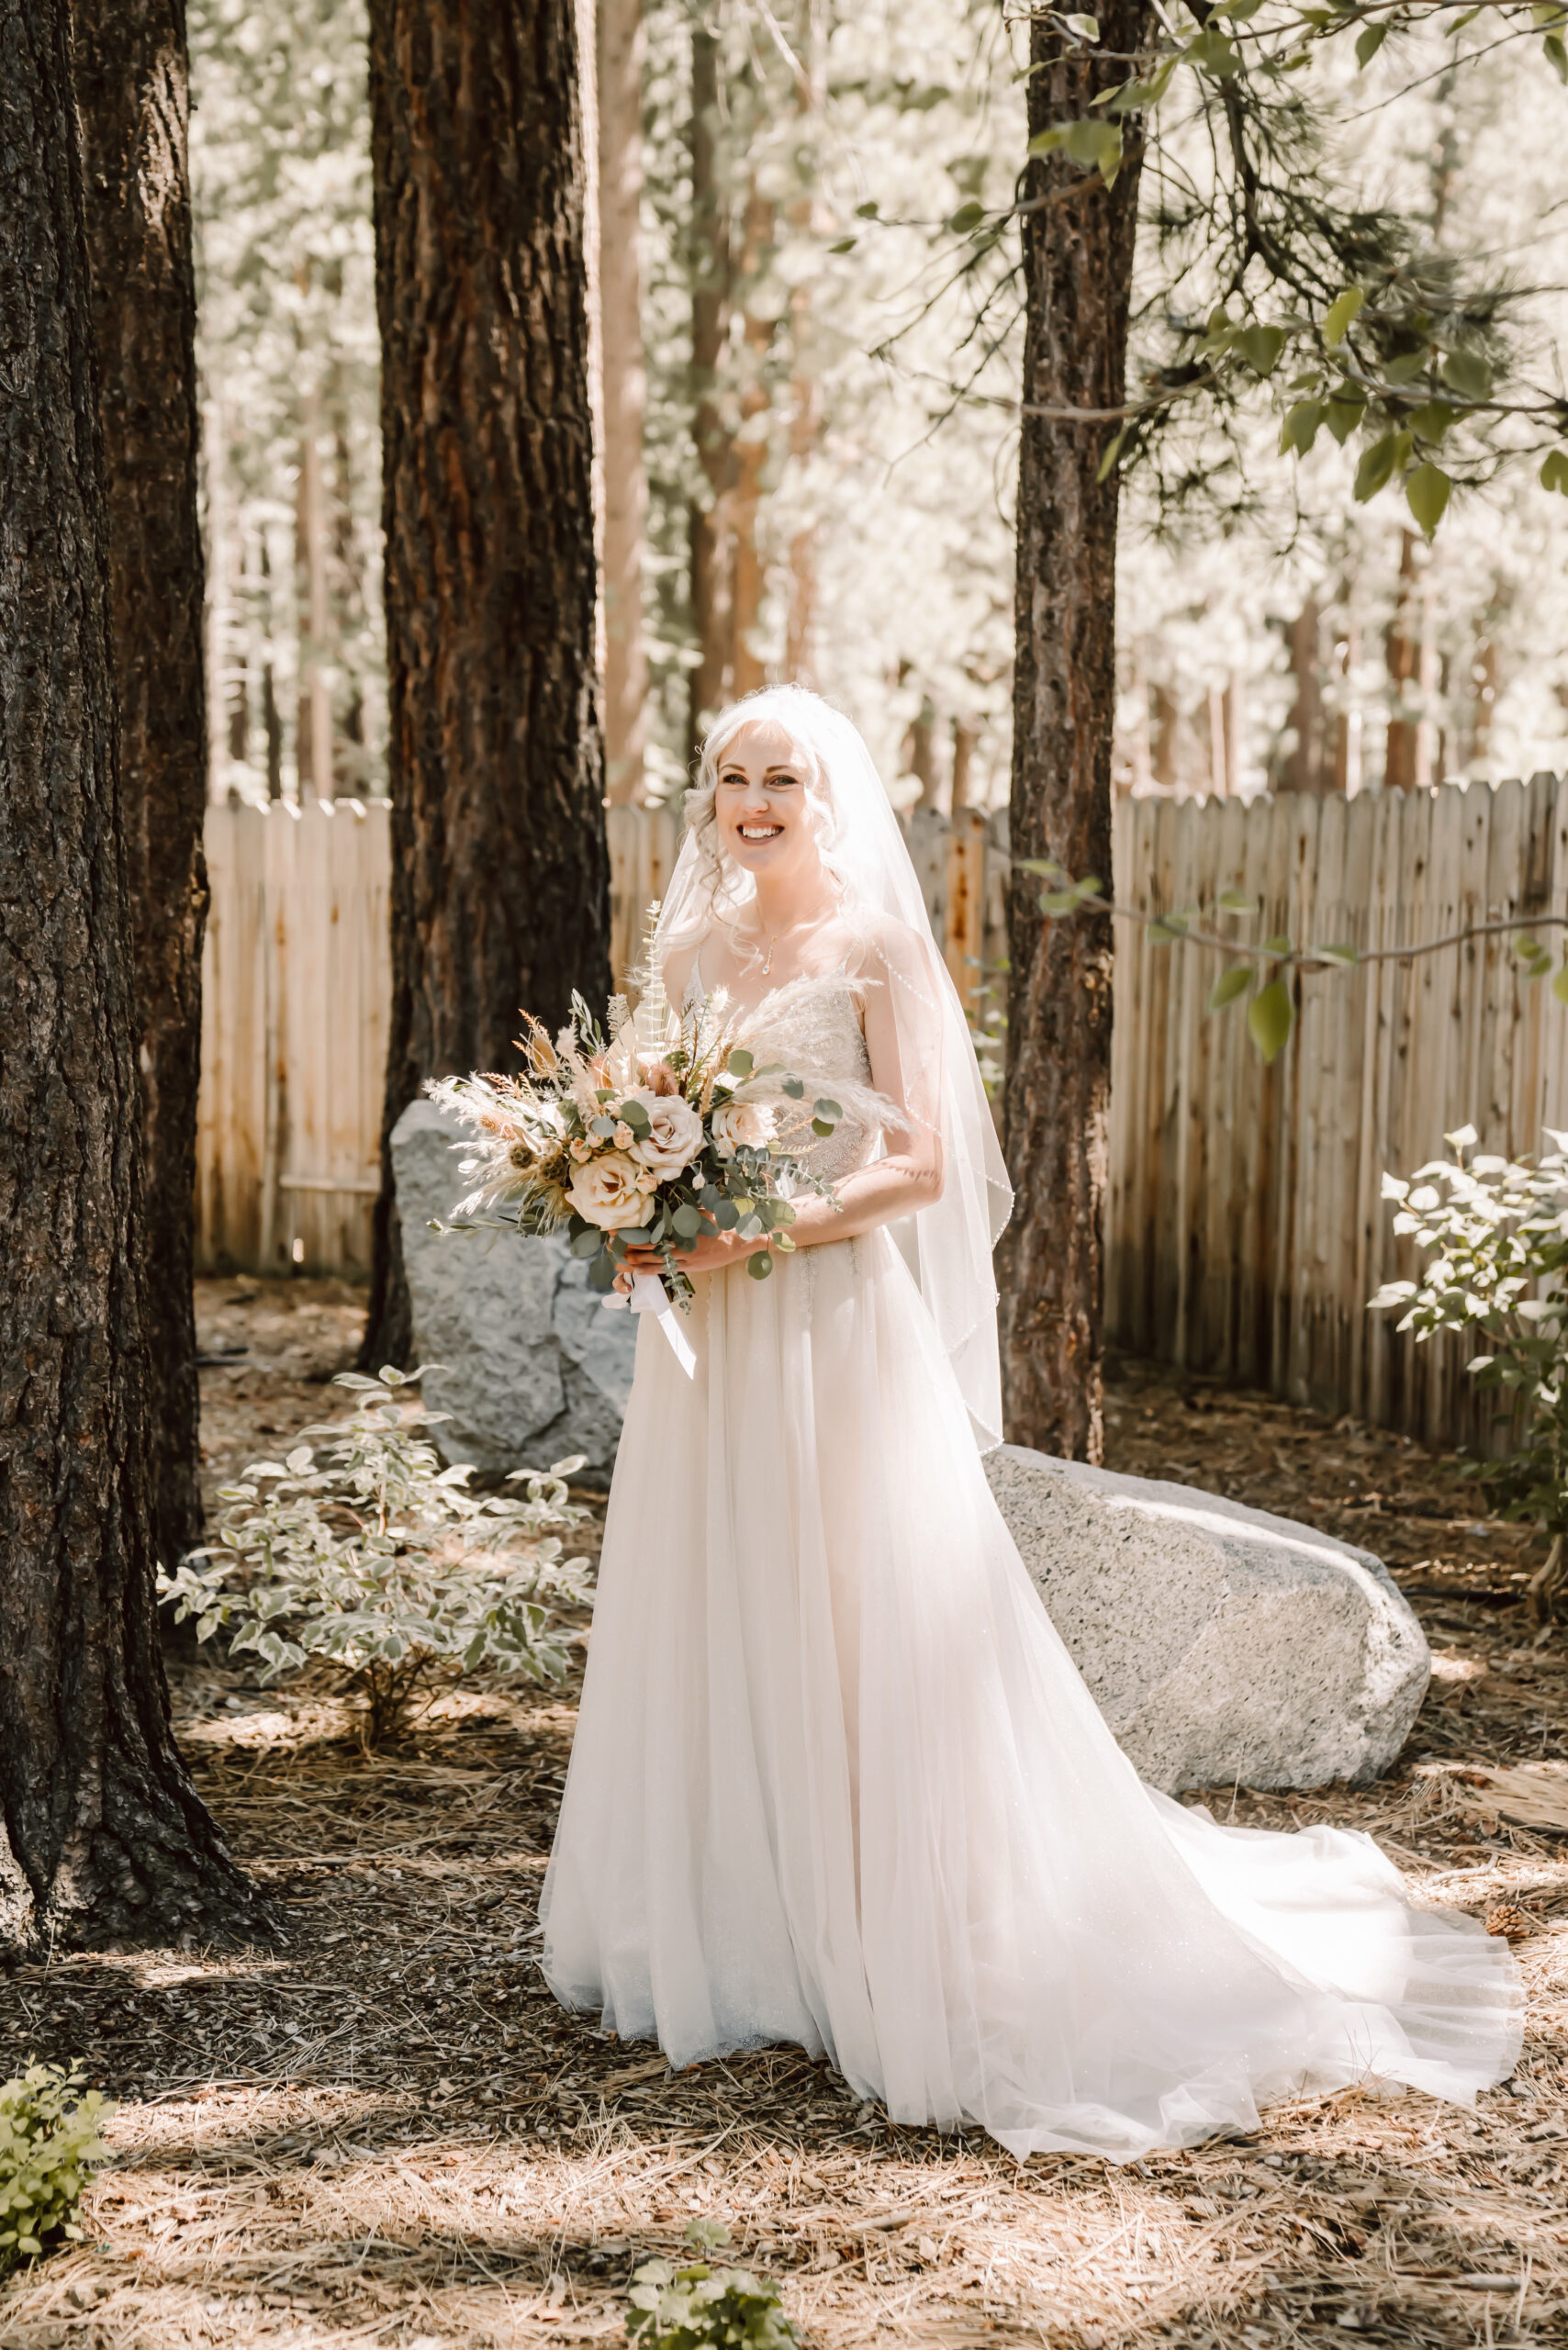 A bride standing in the forest wearing a flowy white elopement dress